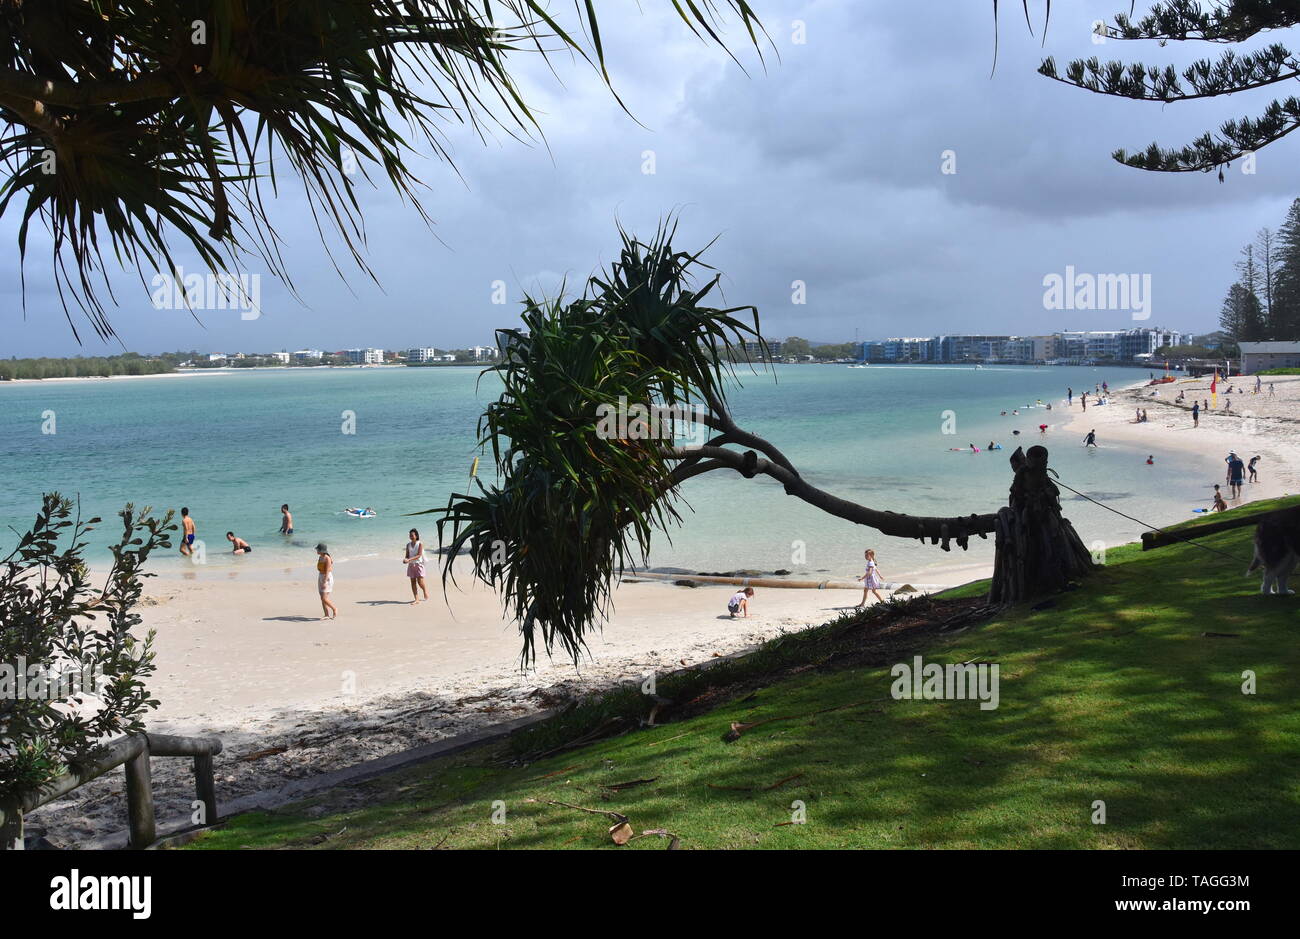 Caloundra, Australia - Apr 21, 2019. Fallen tree in the park. People having fun at Bulcock beach.  View from Happy Valley Park (Sunshine Coast, Queens Stock Photo